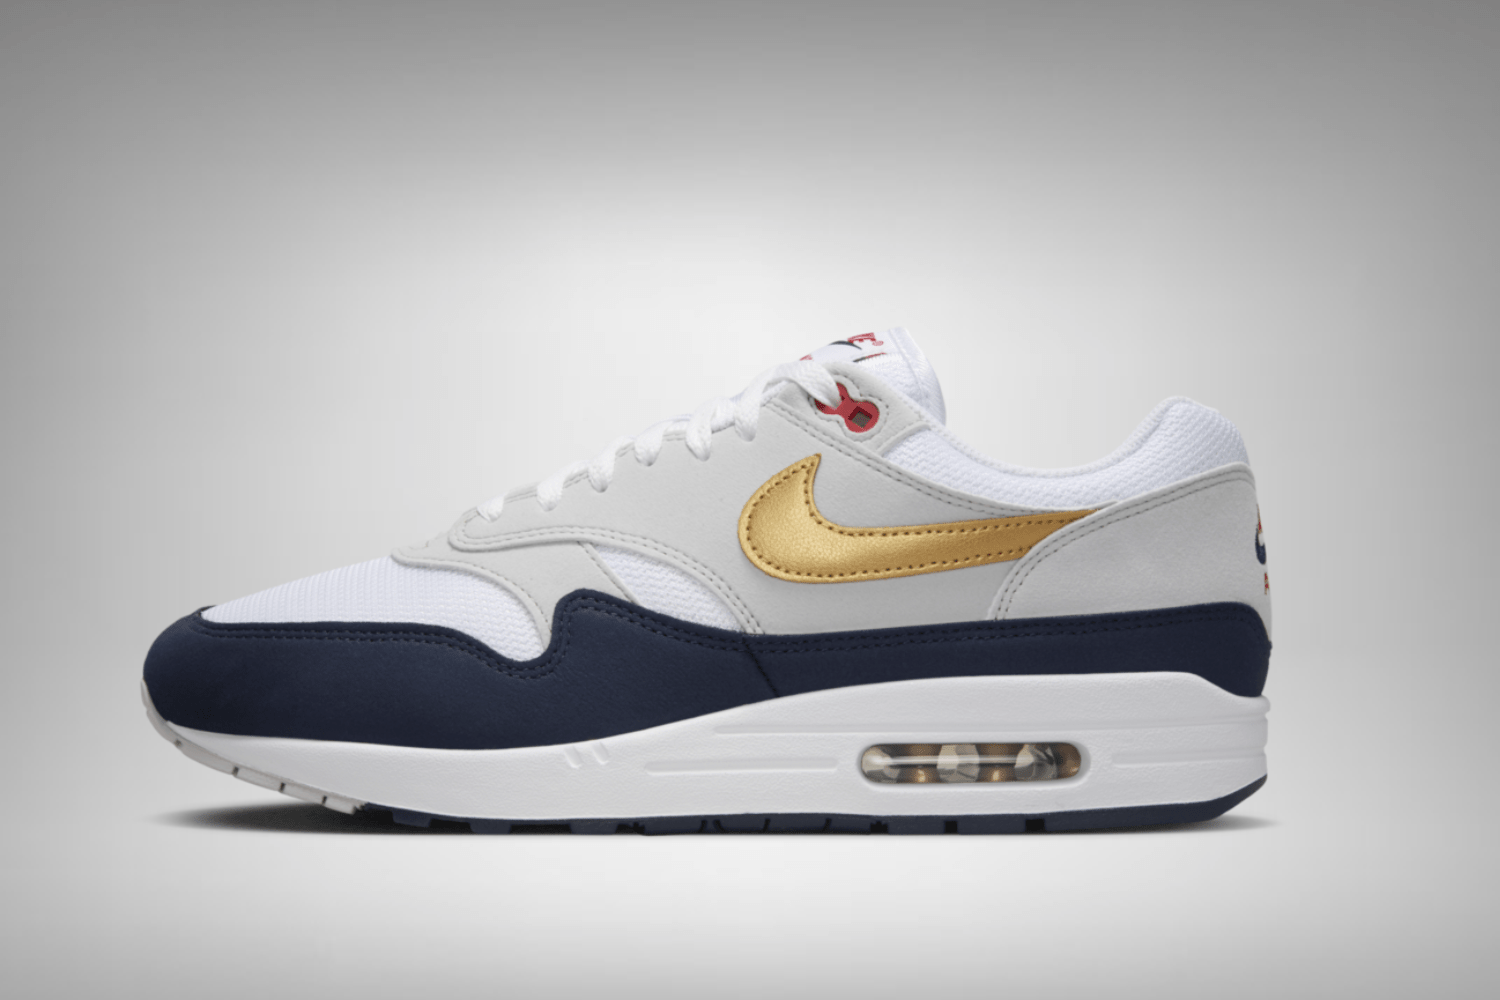 Nike presents the Air Max 1 'Olympic'